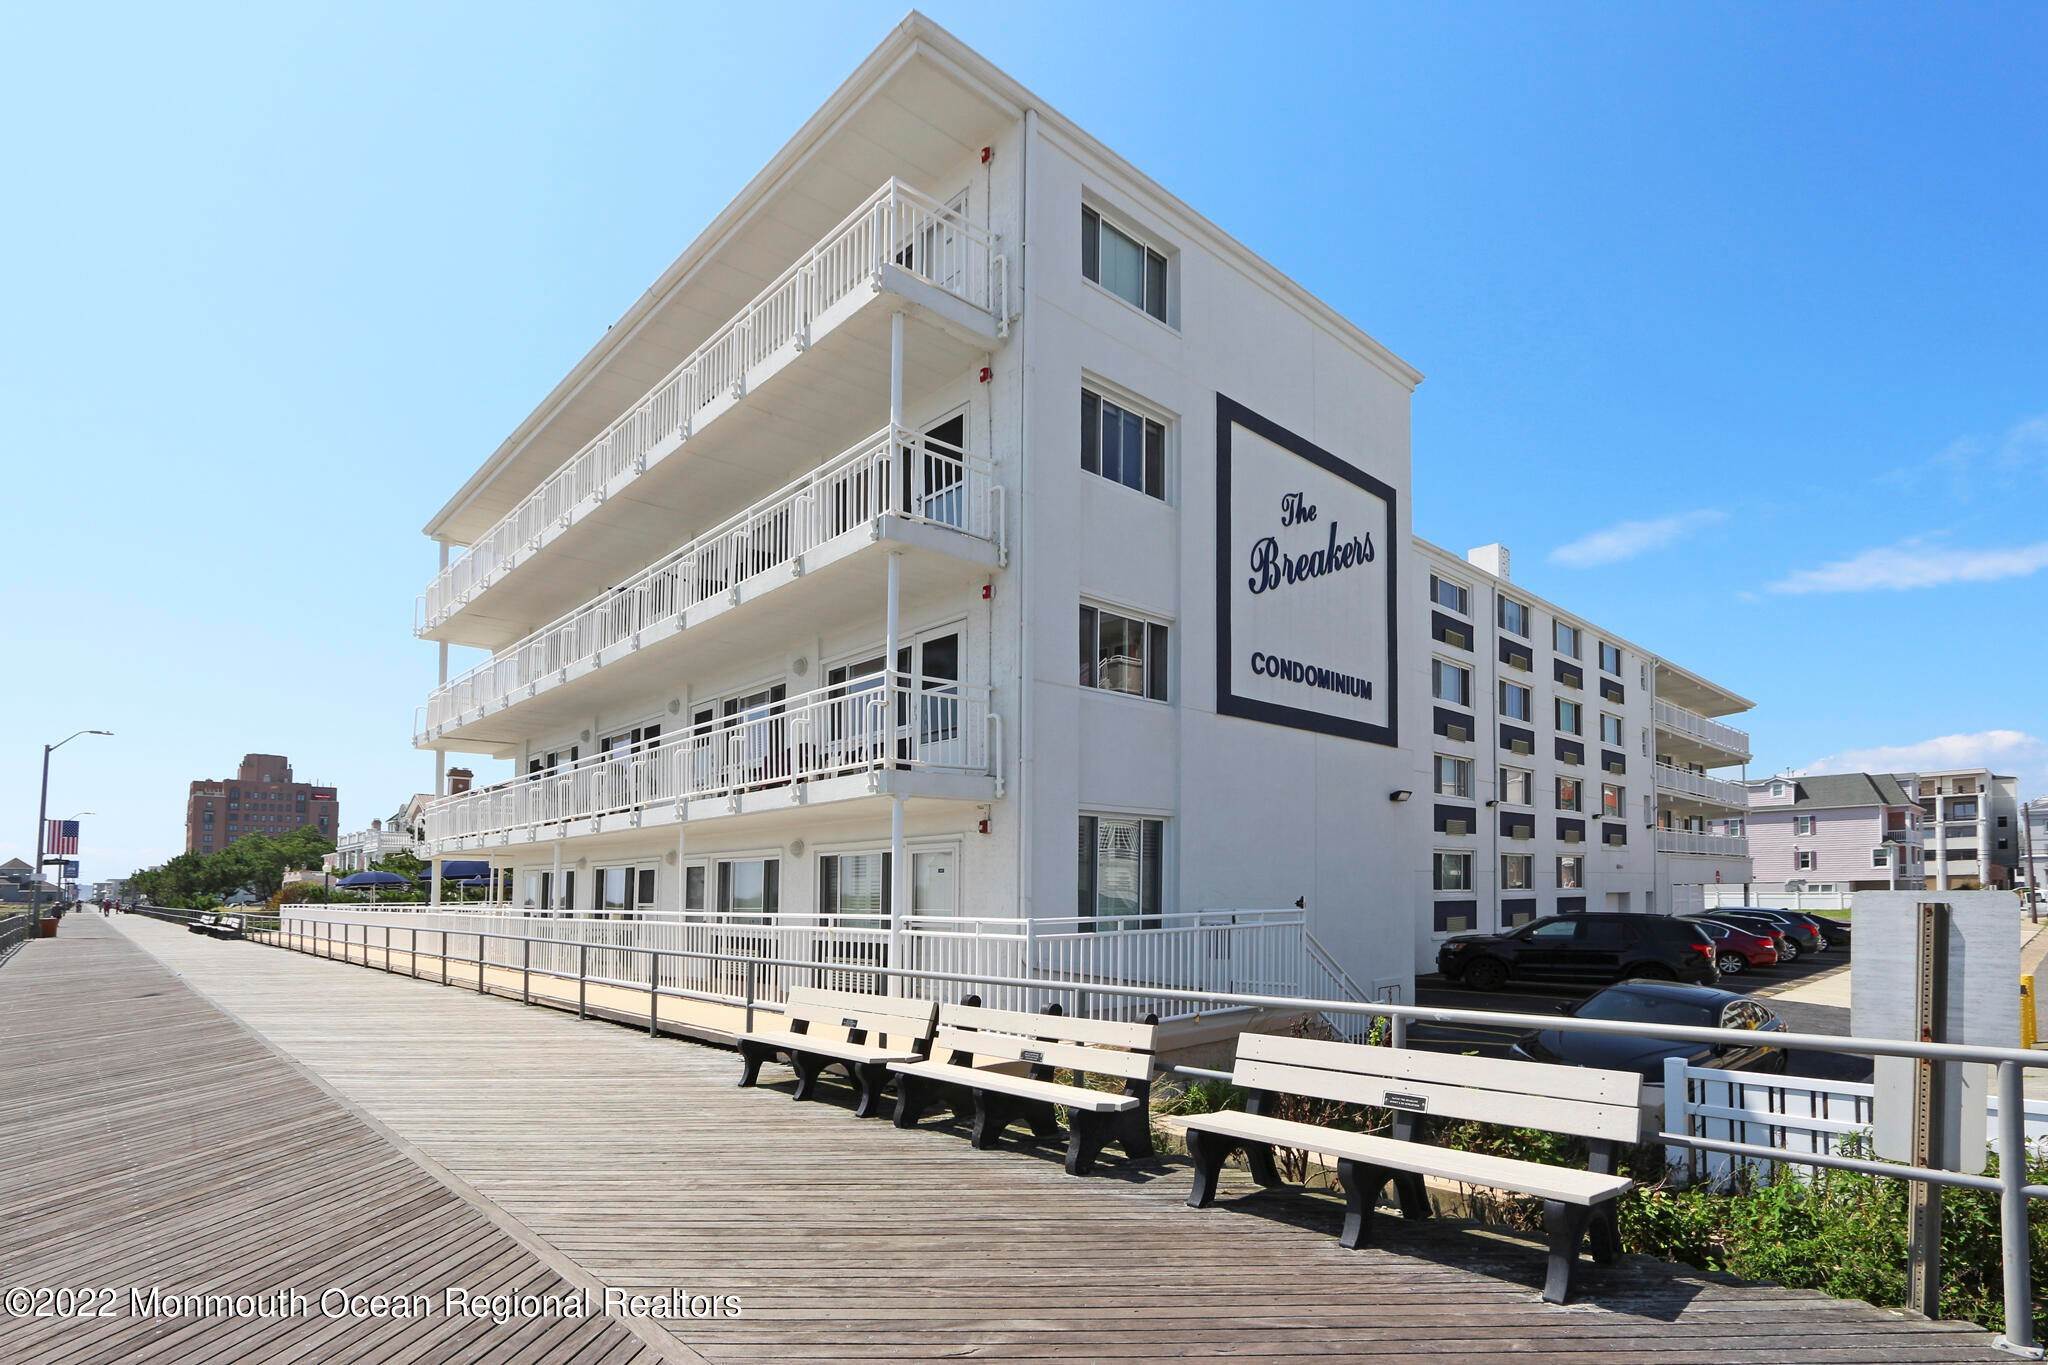 Condominiums for Sale at 111 Surrey Avenue Ventnor City, New Jersey 08406 United States